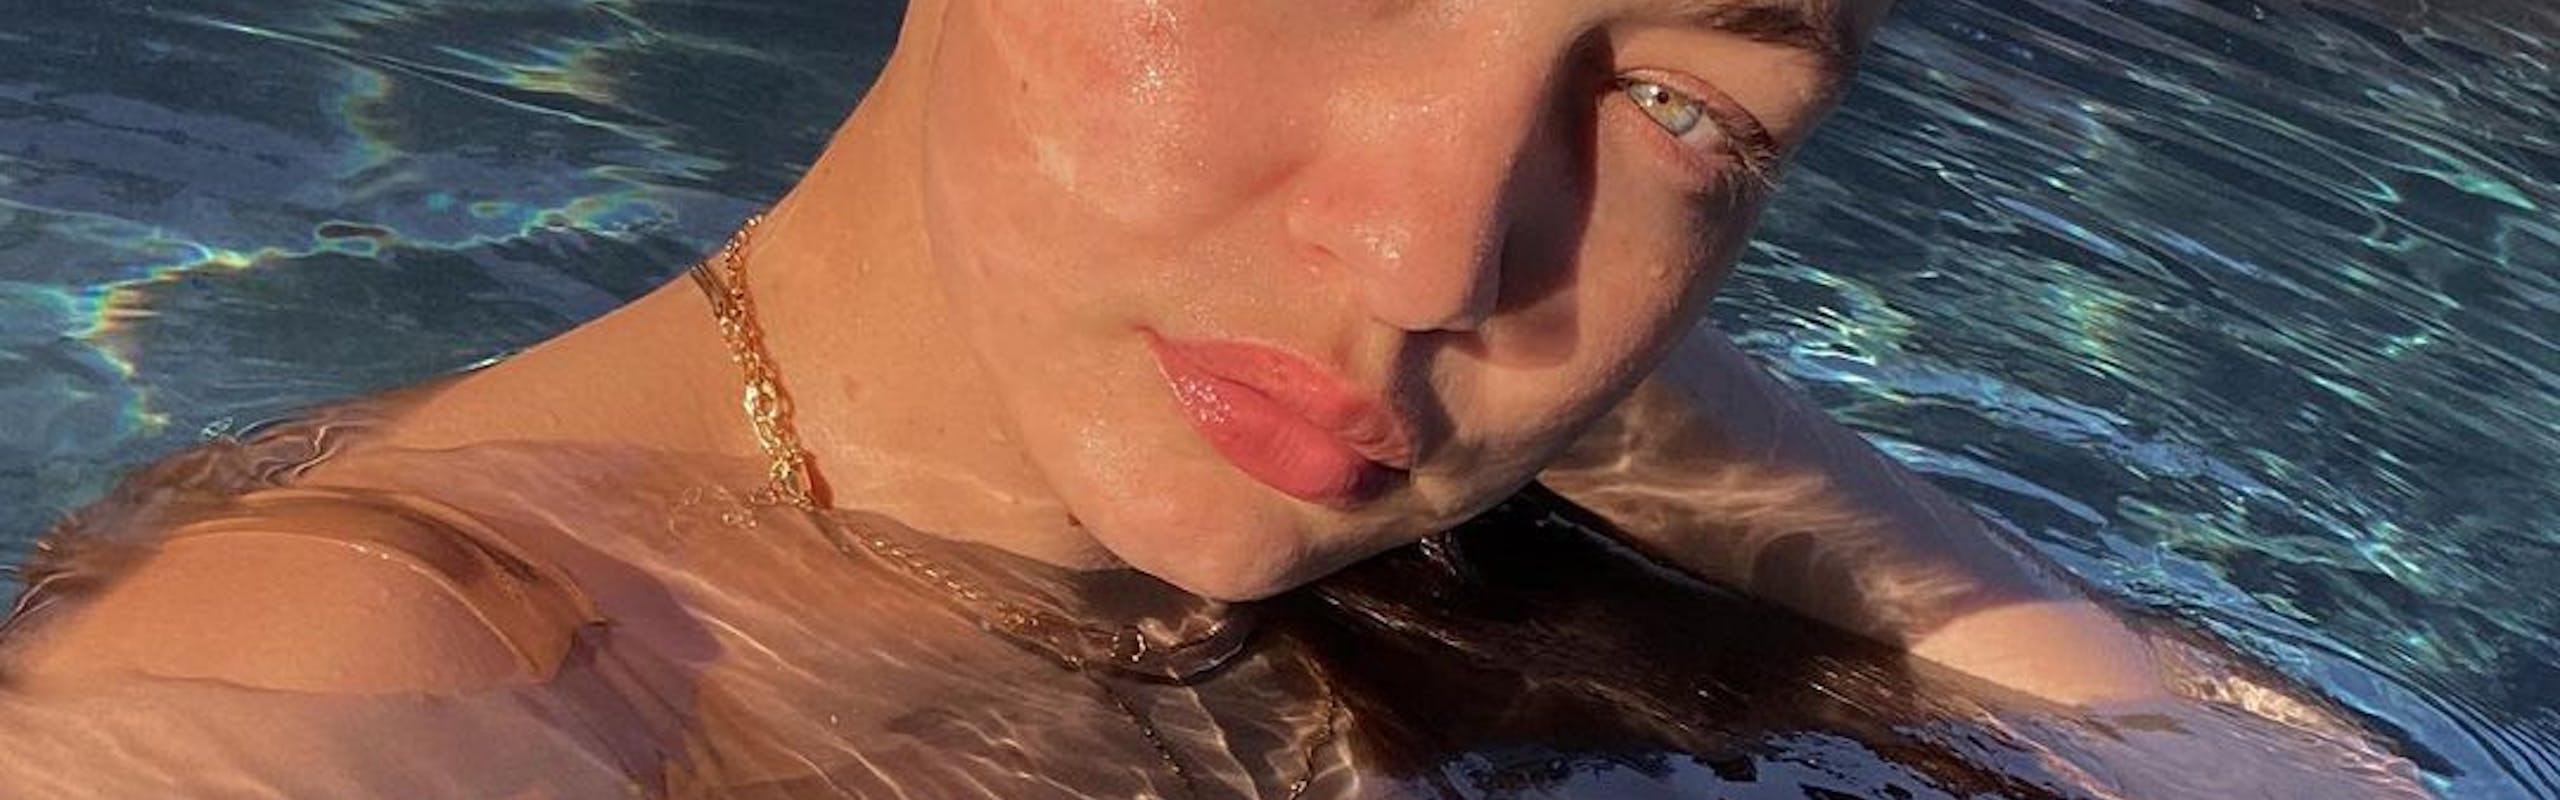 Gigi Hadid swims in a pool without makeup on. 